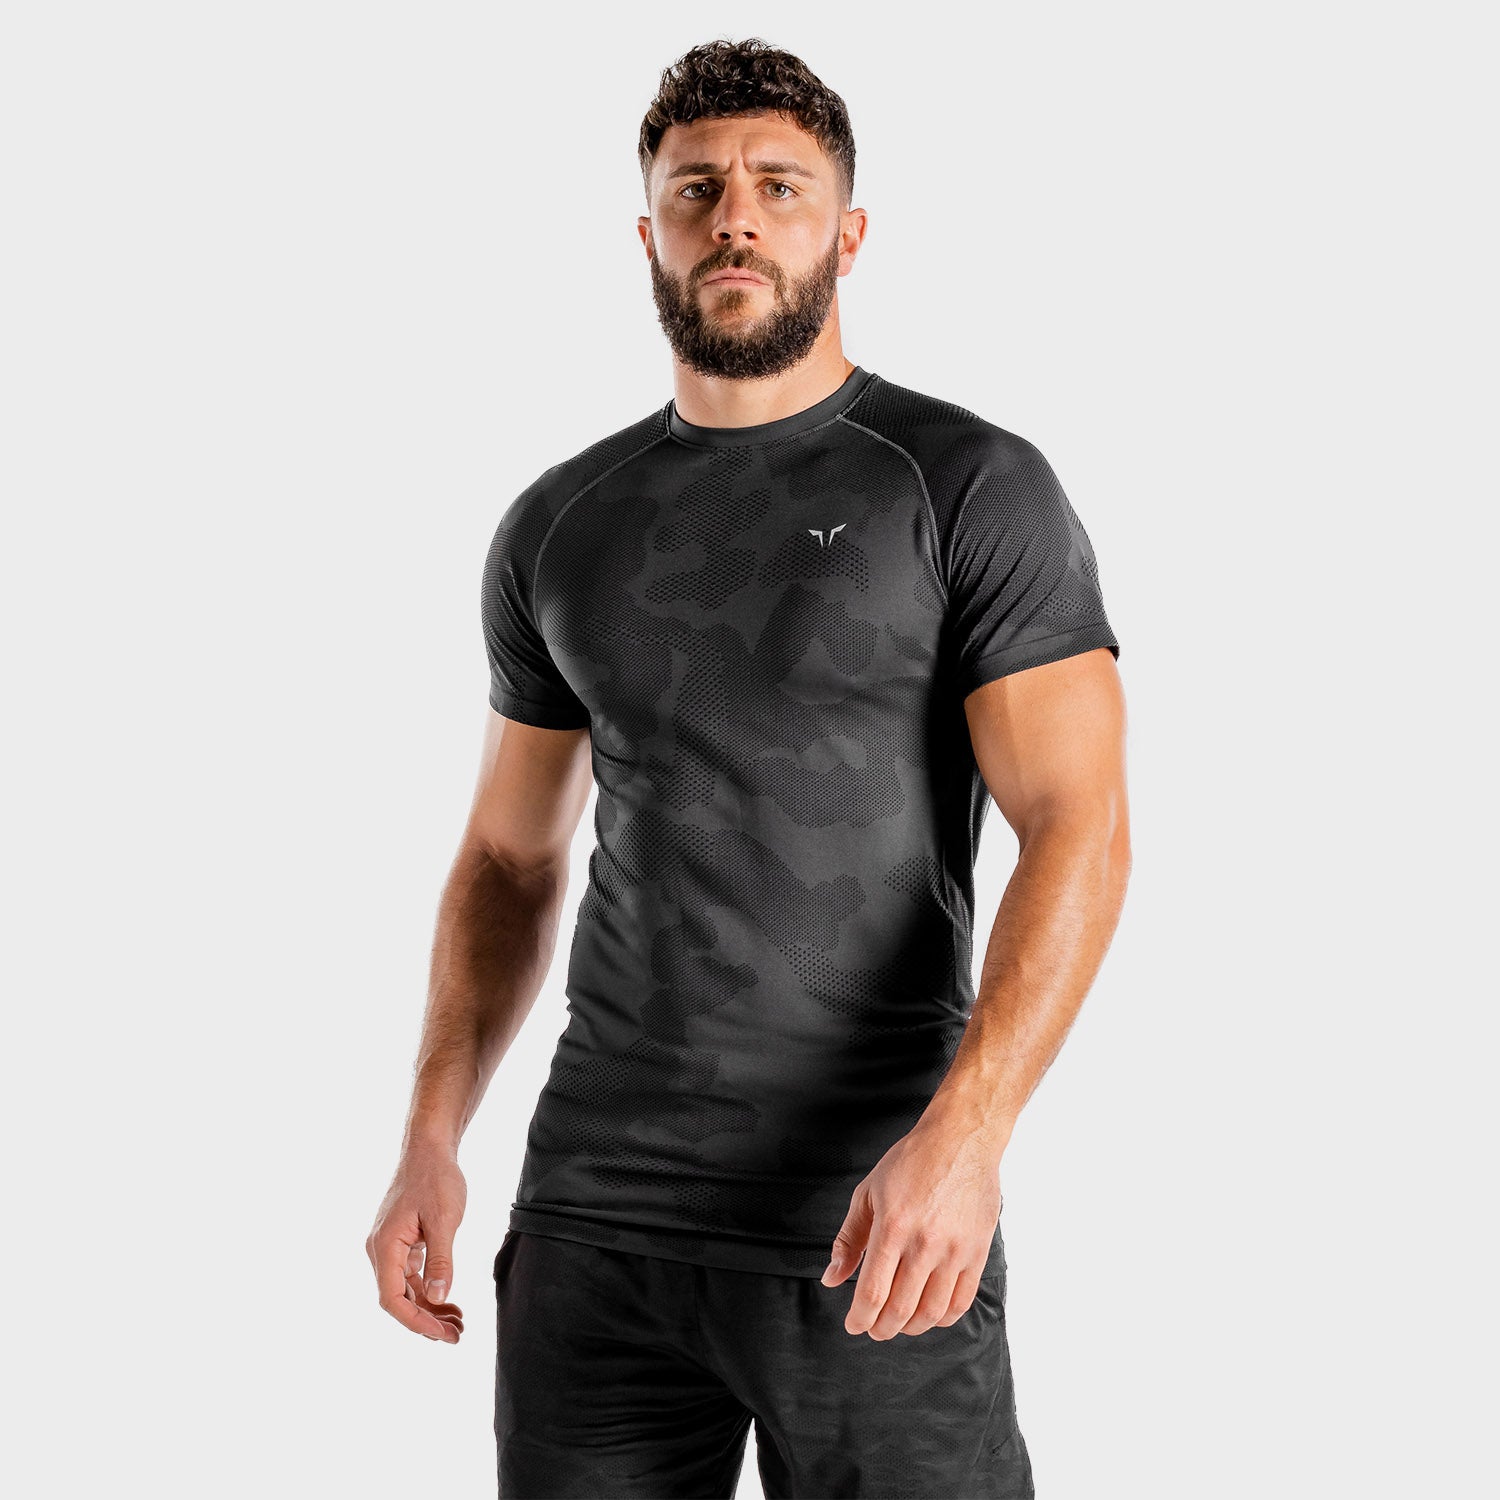 squatwolf-workout-shirts-for-men-wolf-seamless-workout-tee-black-gym-wear